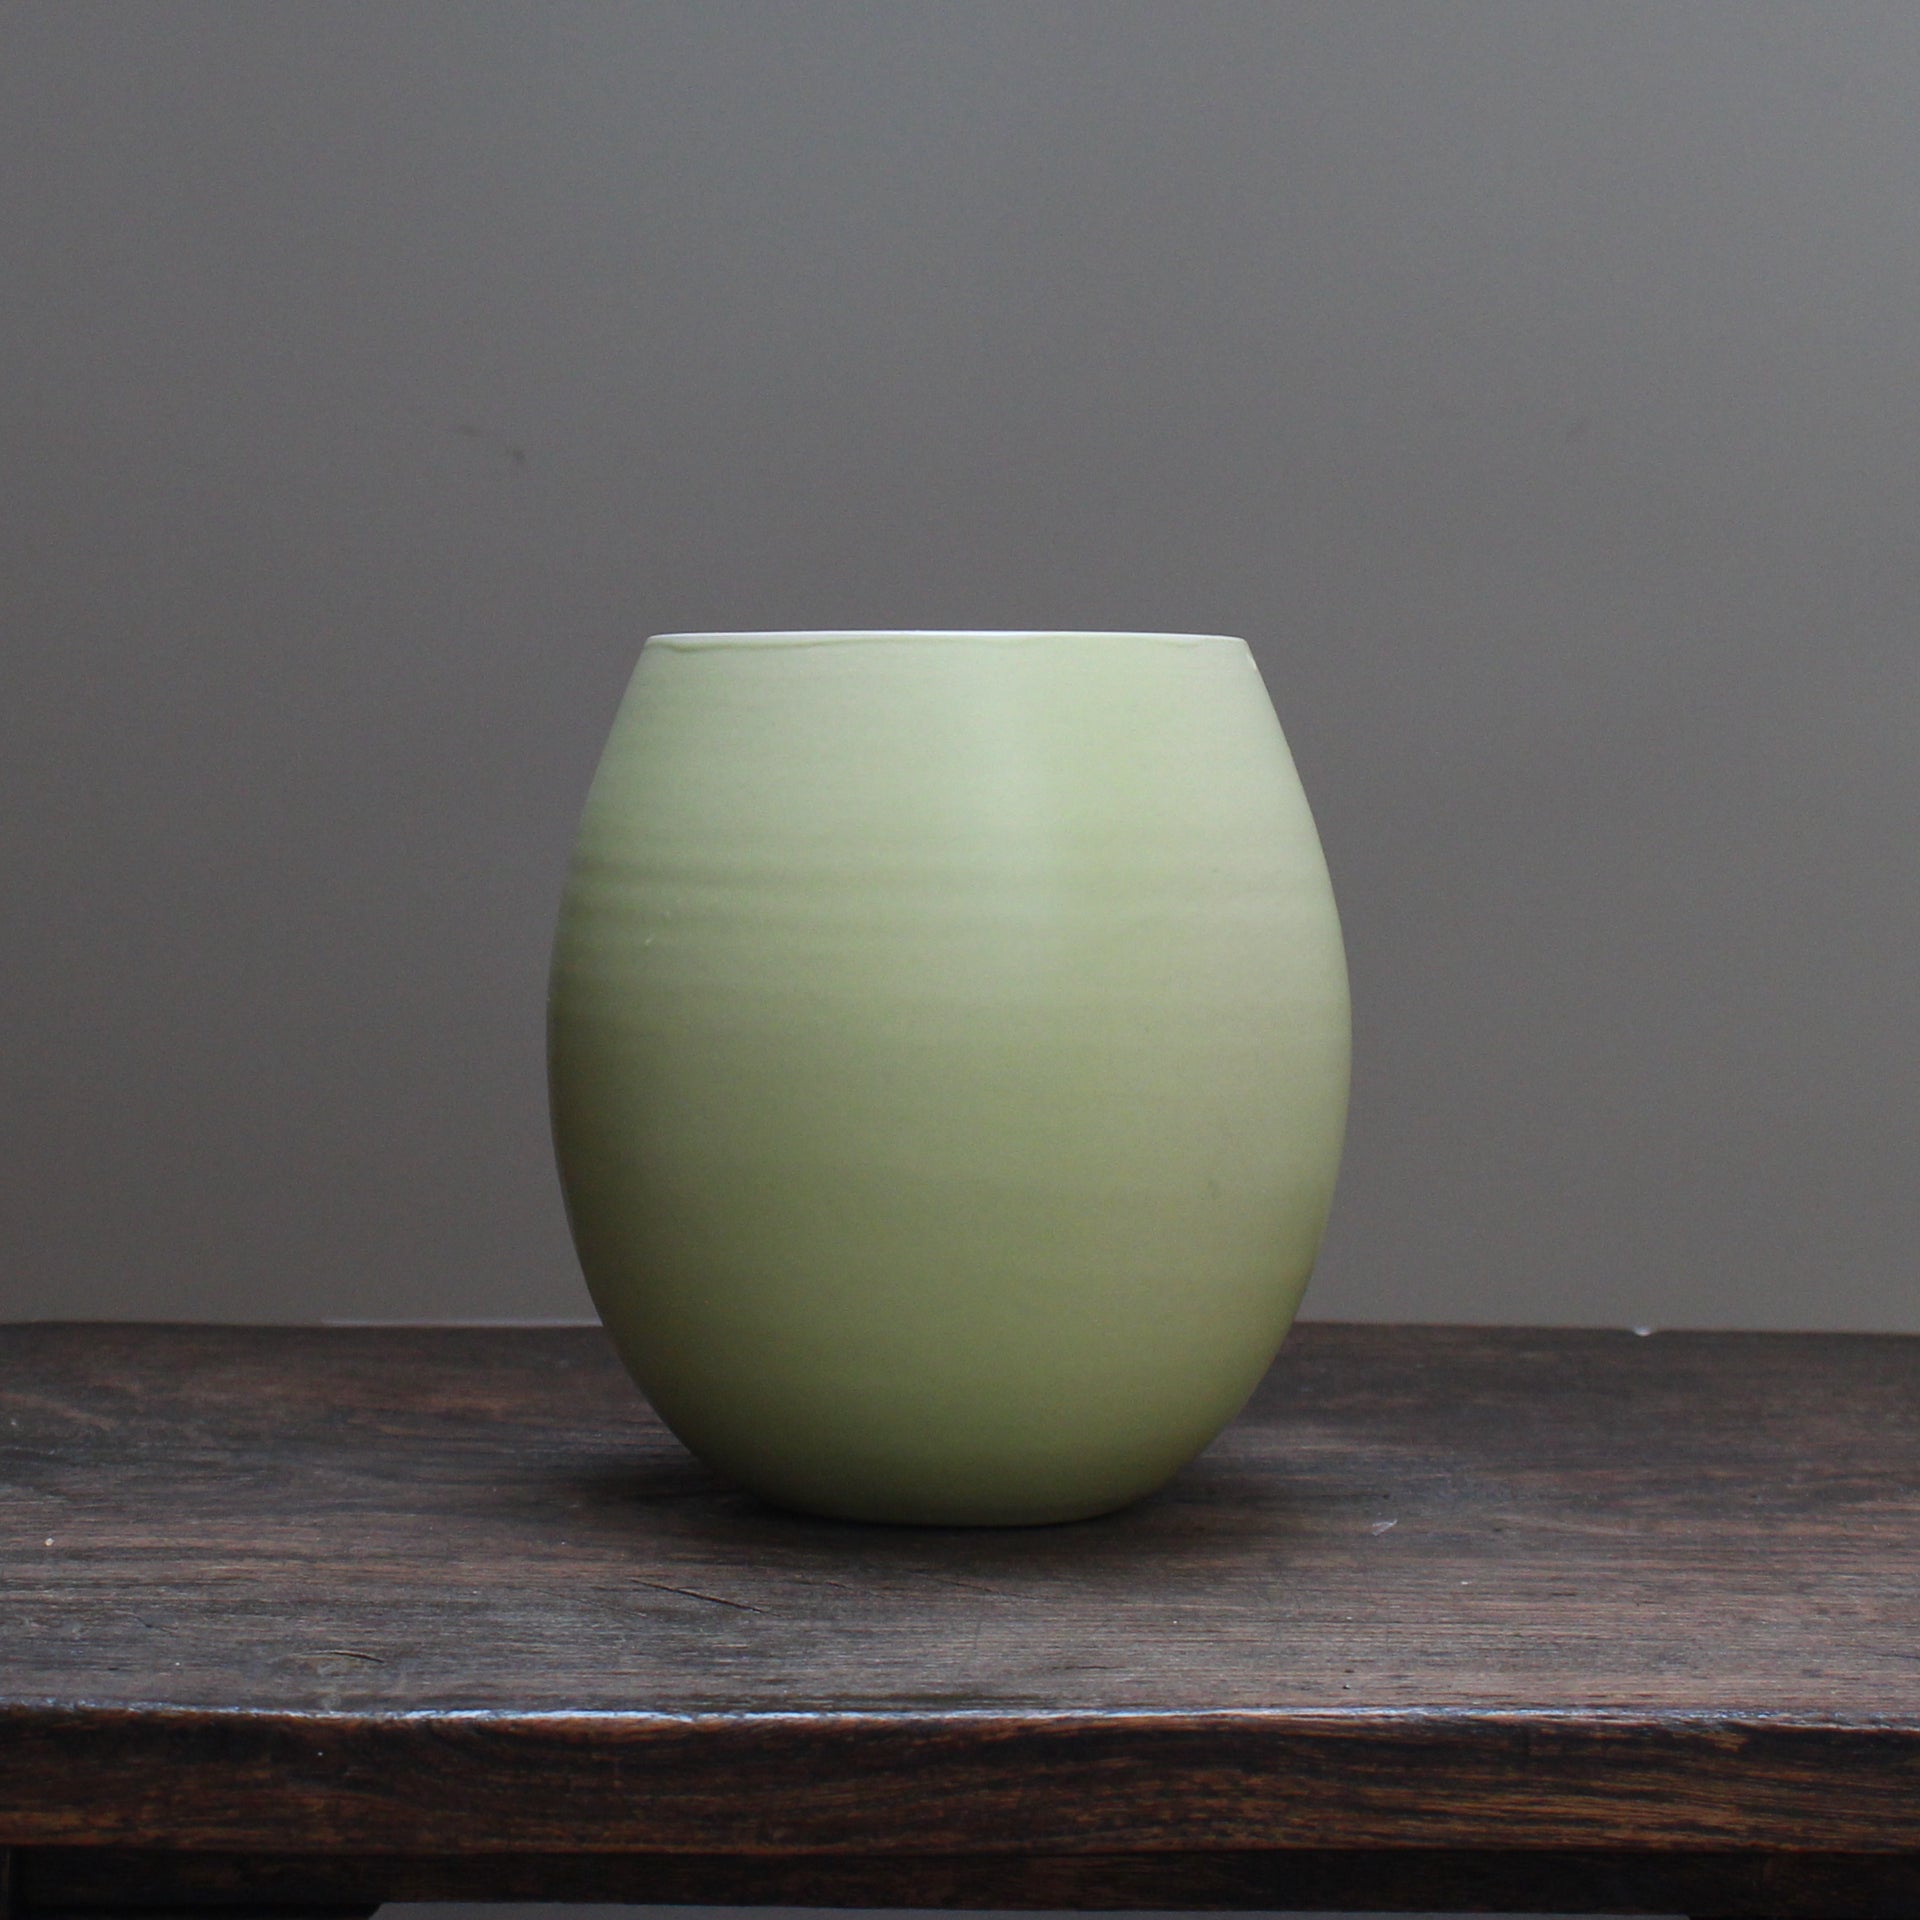 almond green curved vase by Lucy Burley on a wooden table